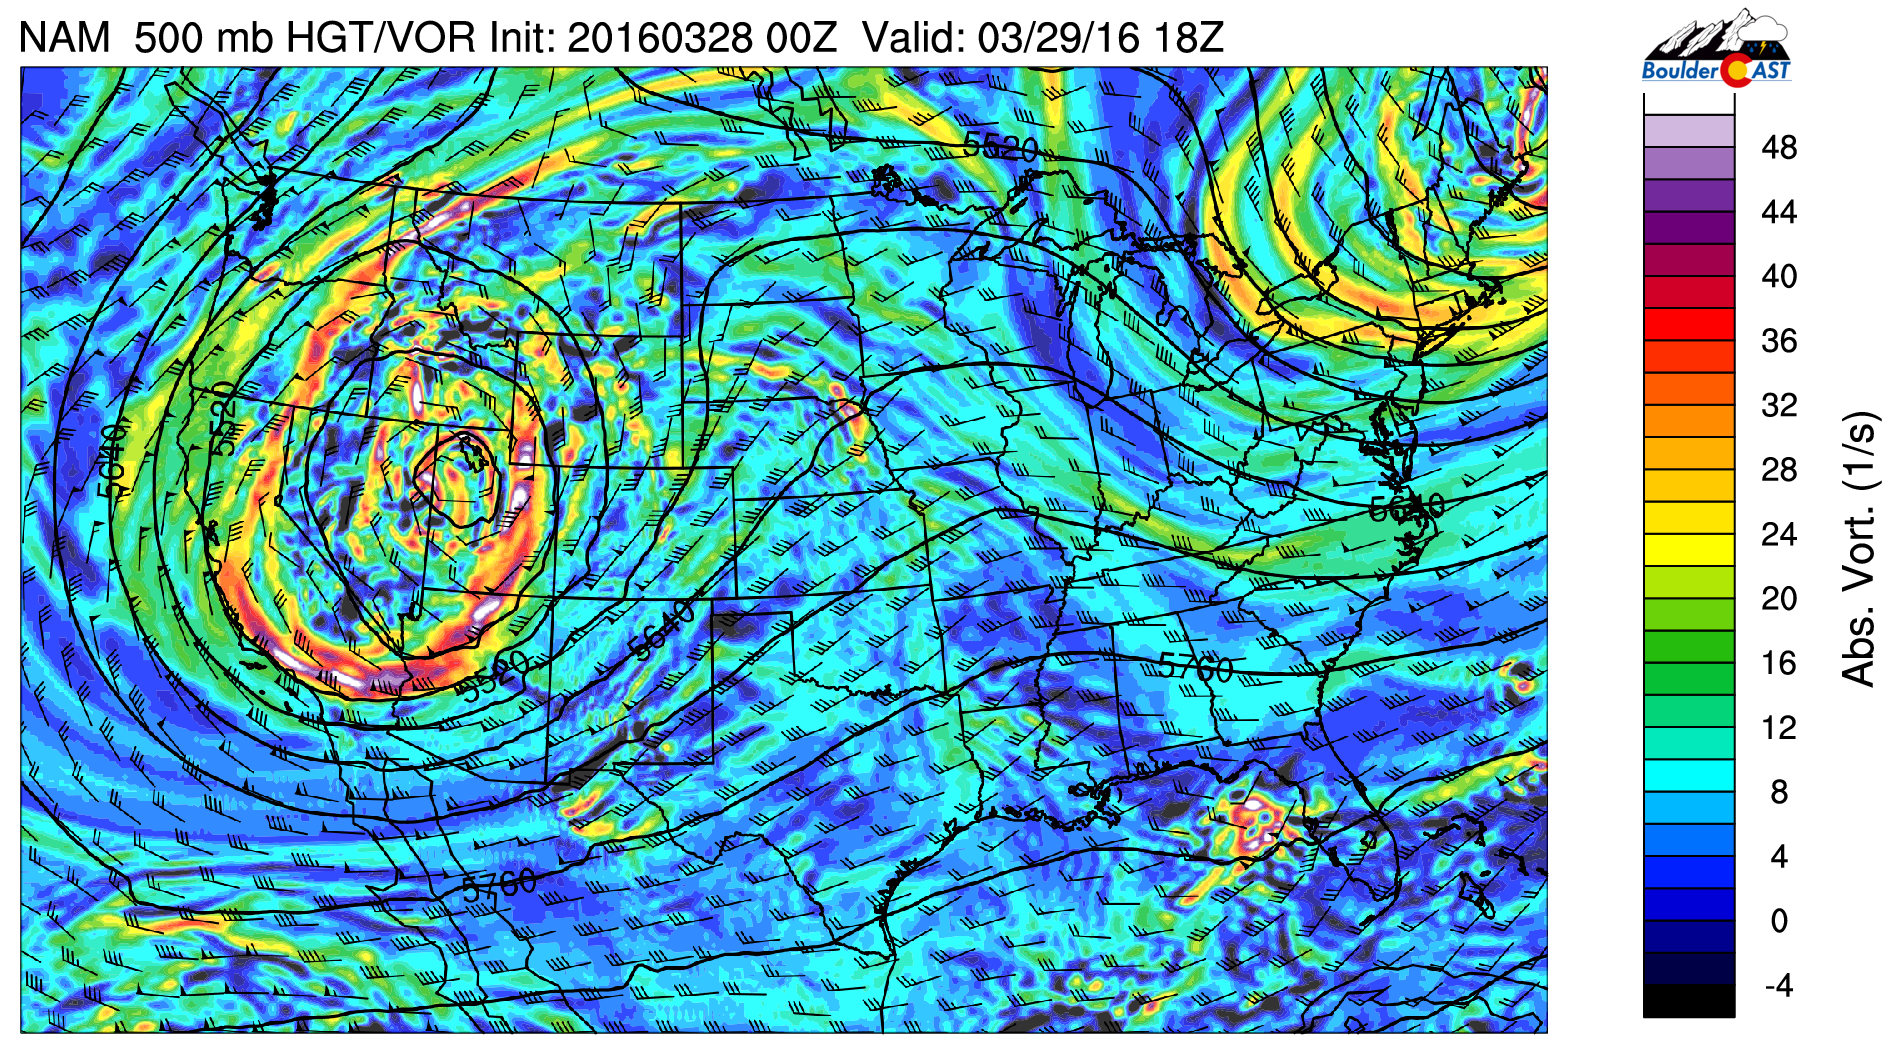 NAM 500mb vorticity map for Tuesday afternoon